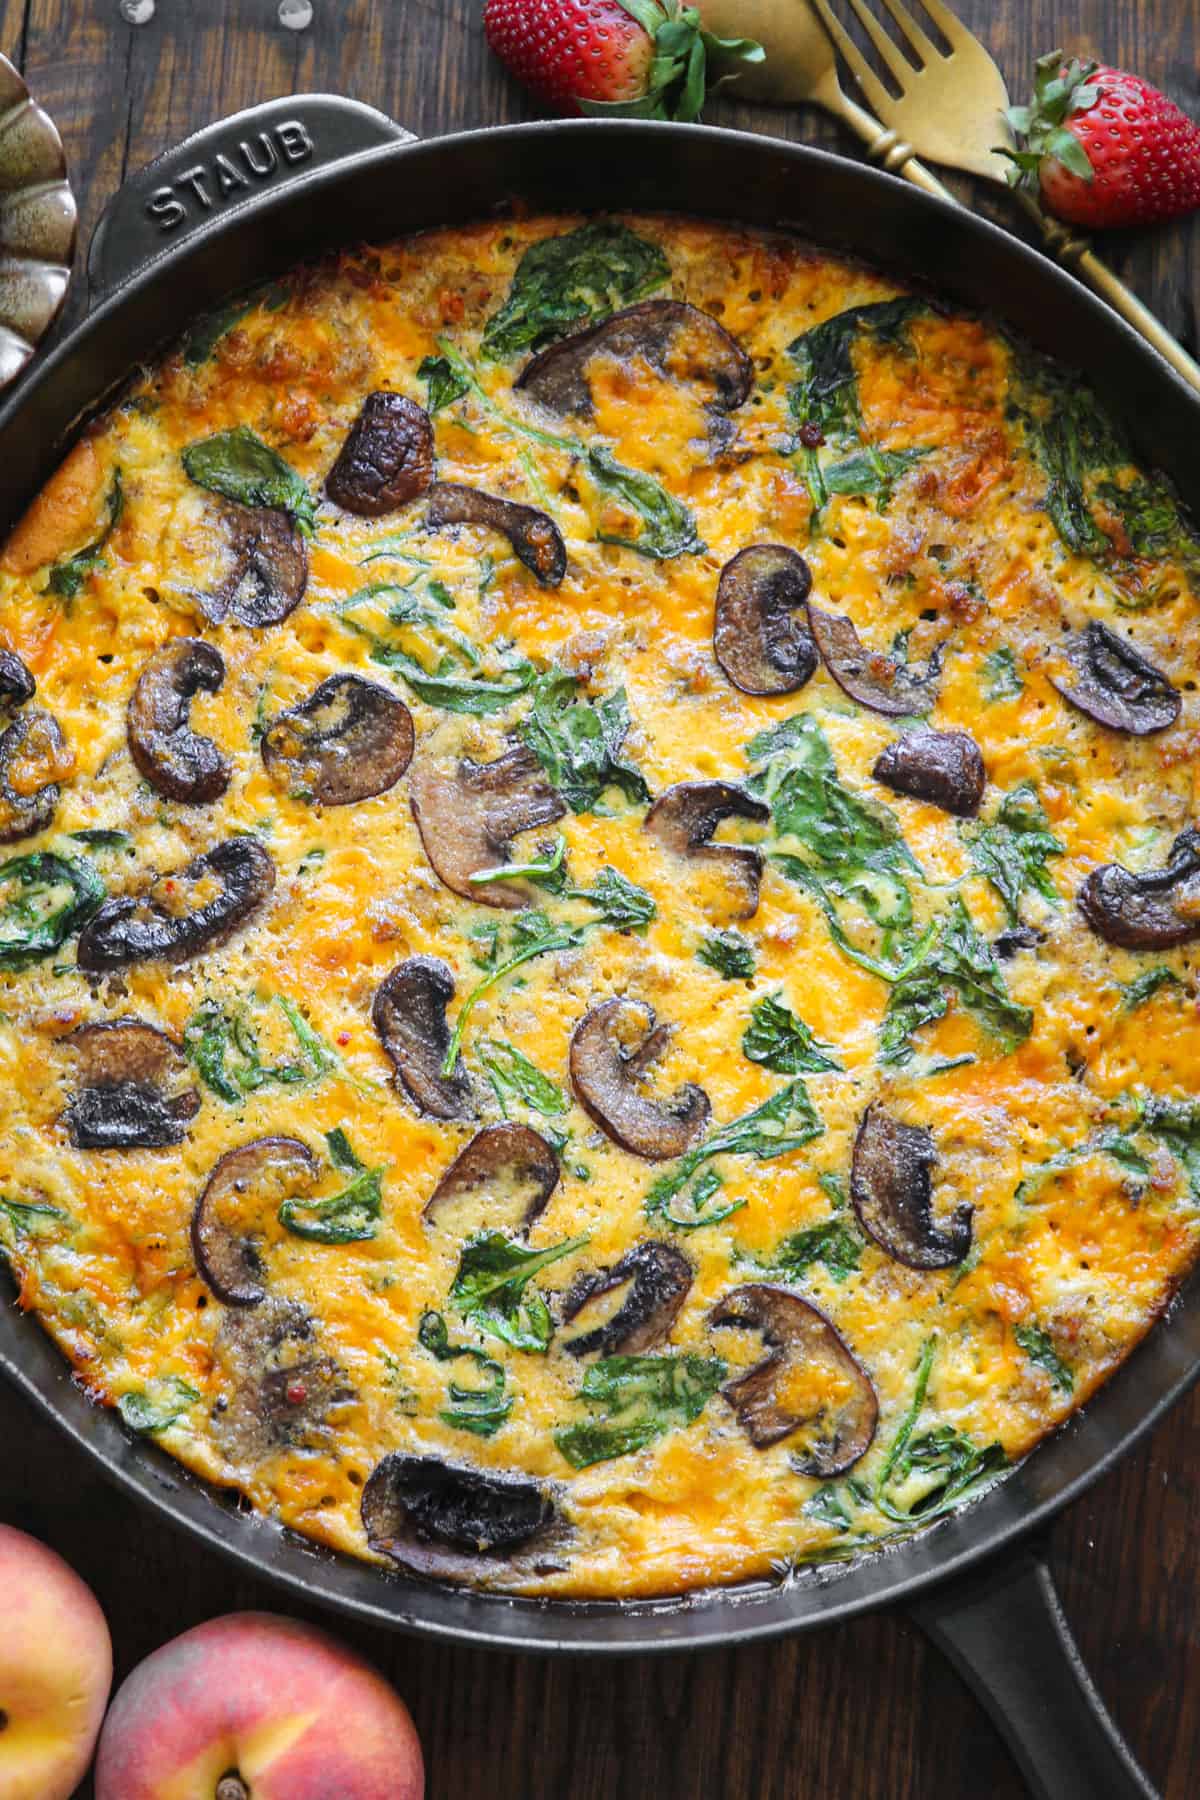 Sausage Frittata with Spinach and Mushrooms - in a cast iron skillet.